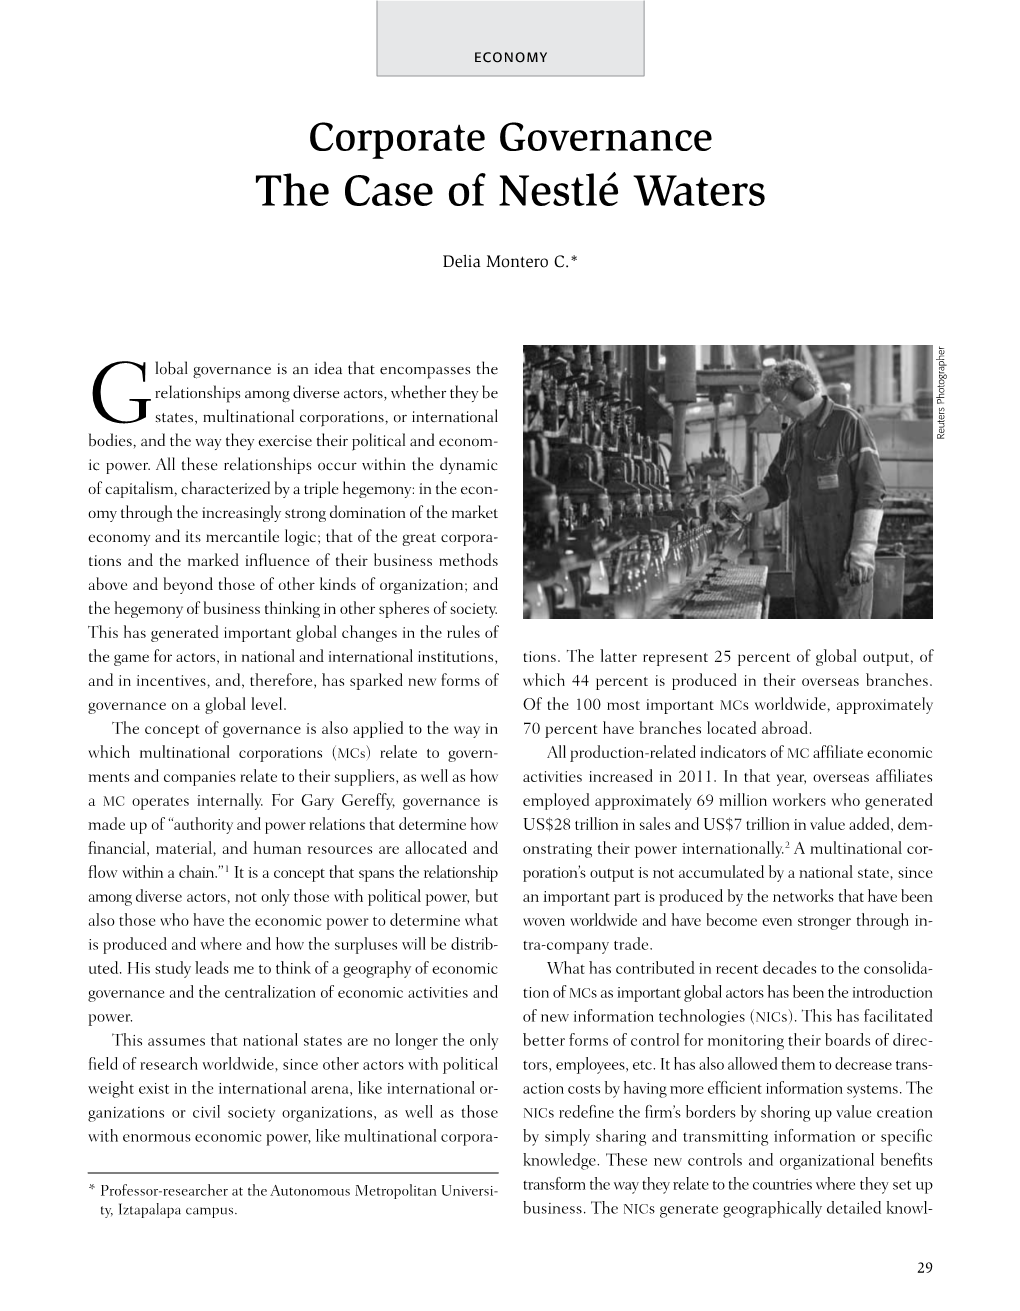 Corporate Governance the Case of Nestlé Waters